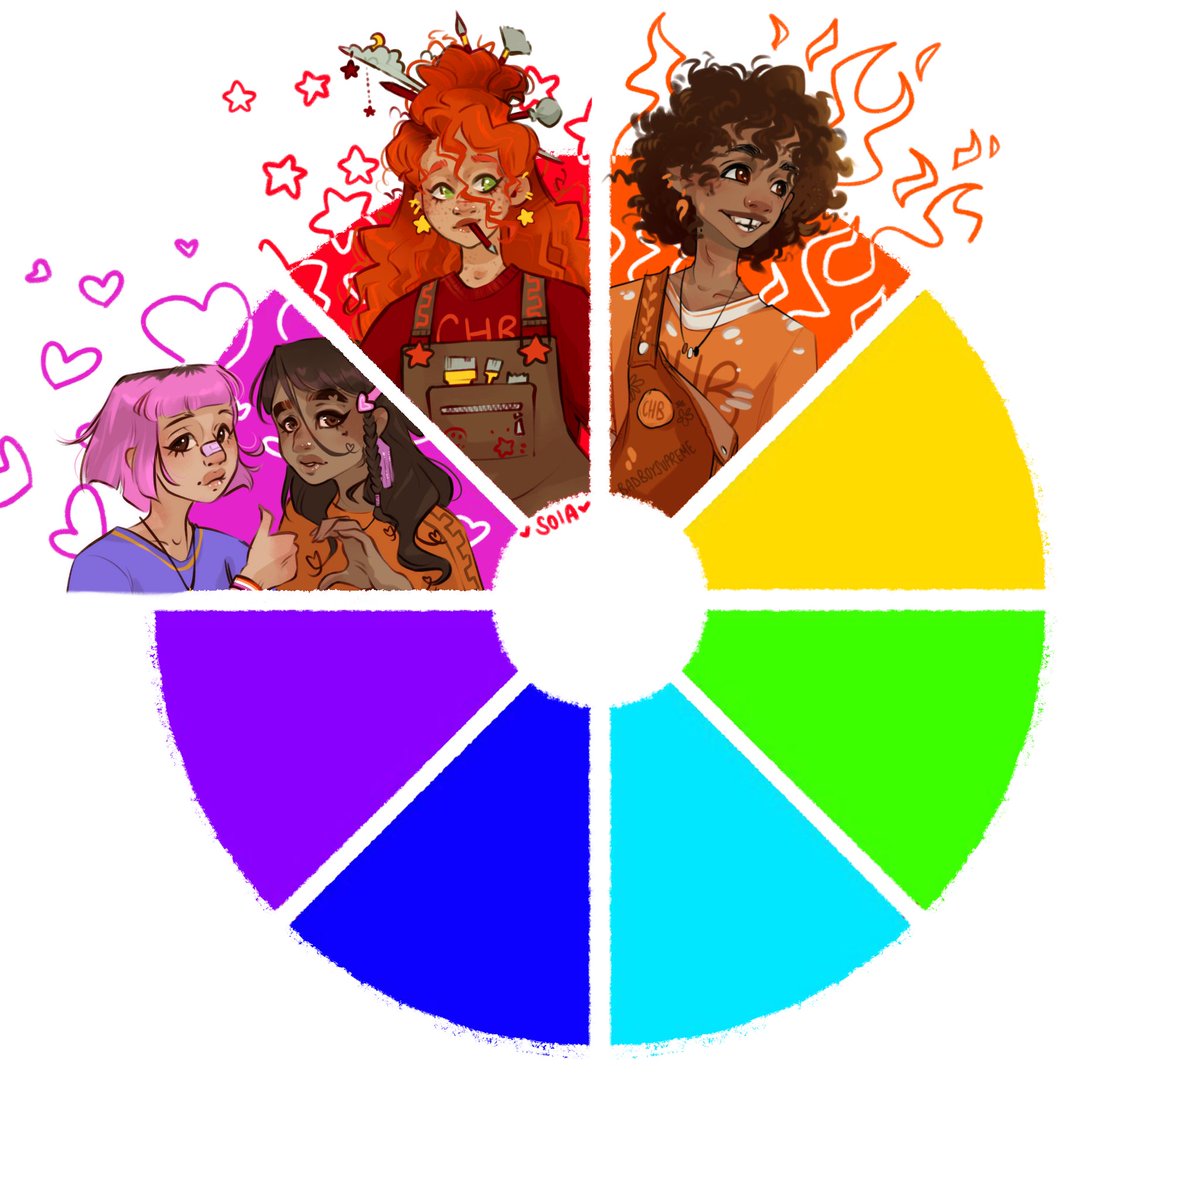 Riordanverse themed color wheel challenge that’s taking a chaotic turn need your help picking the next combo of colors and characters!

I had to go for Leo for orange and since I couldn’t pick I decided to honor the sapphics and create a chaotic moment between these two